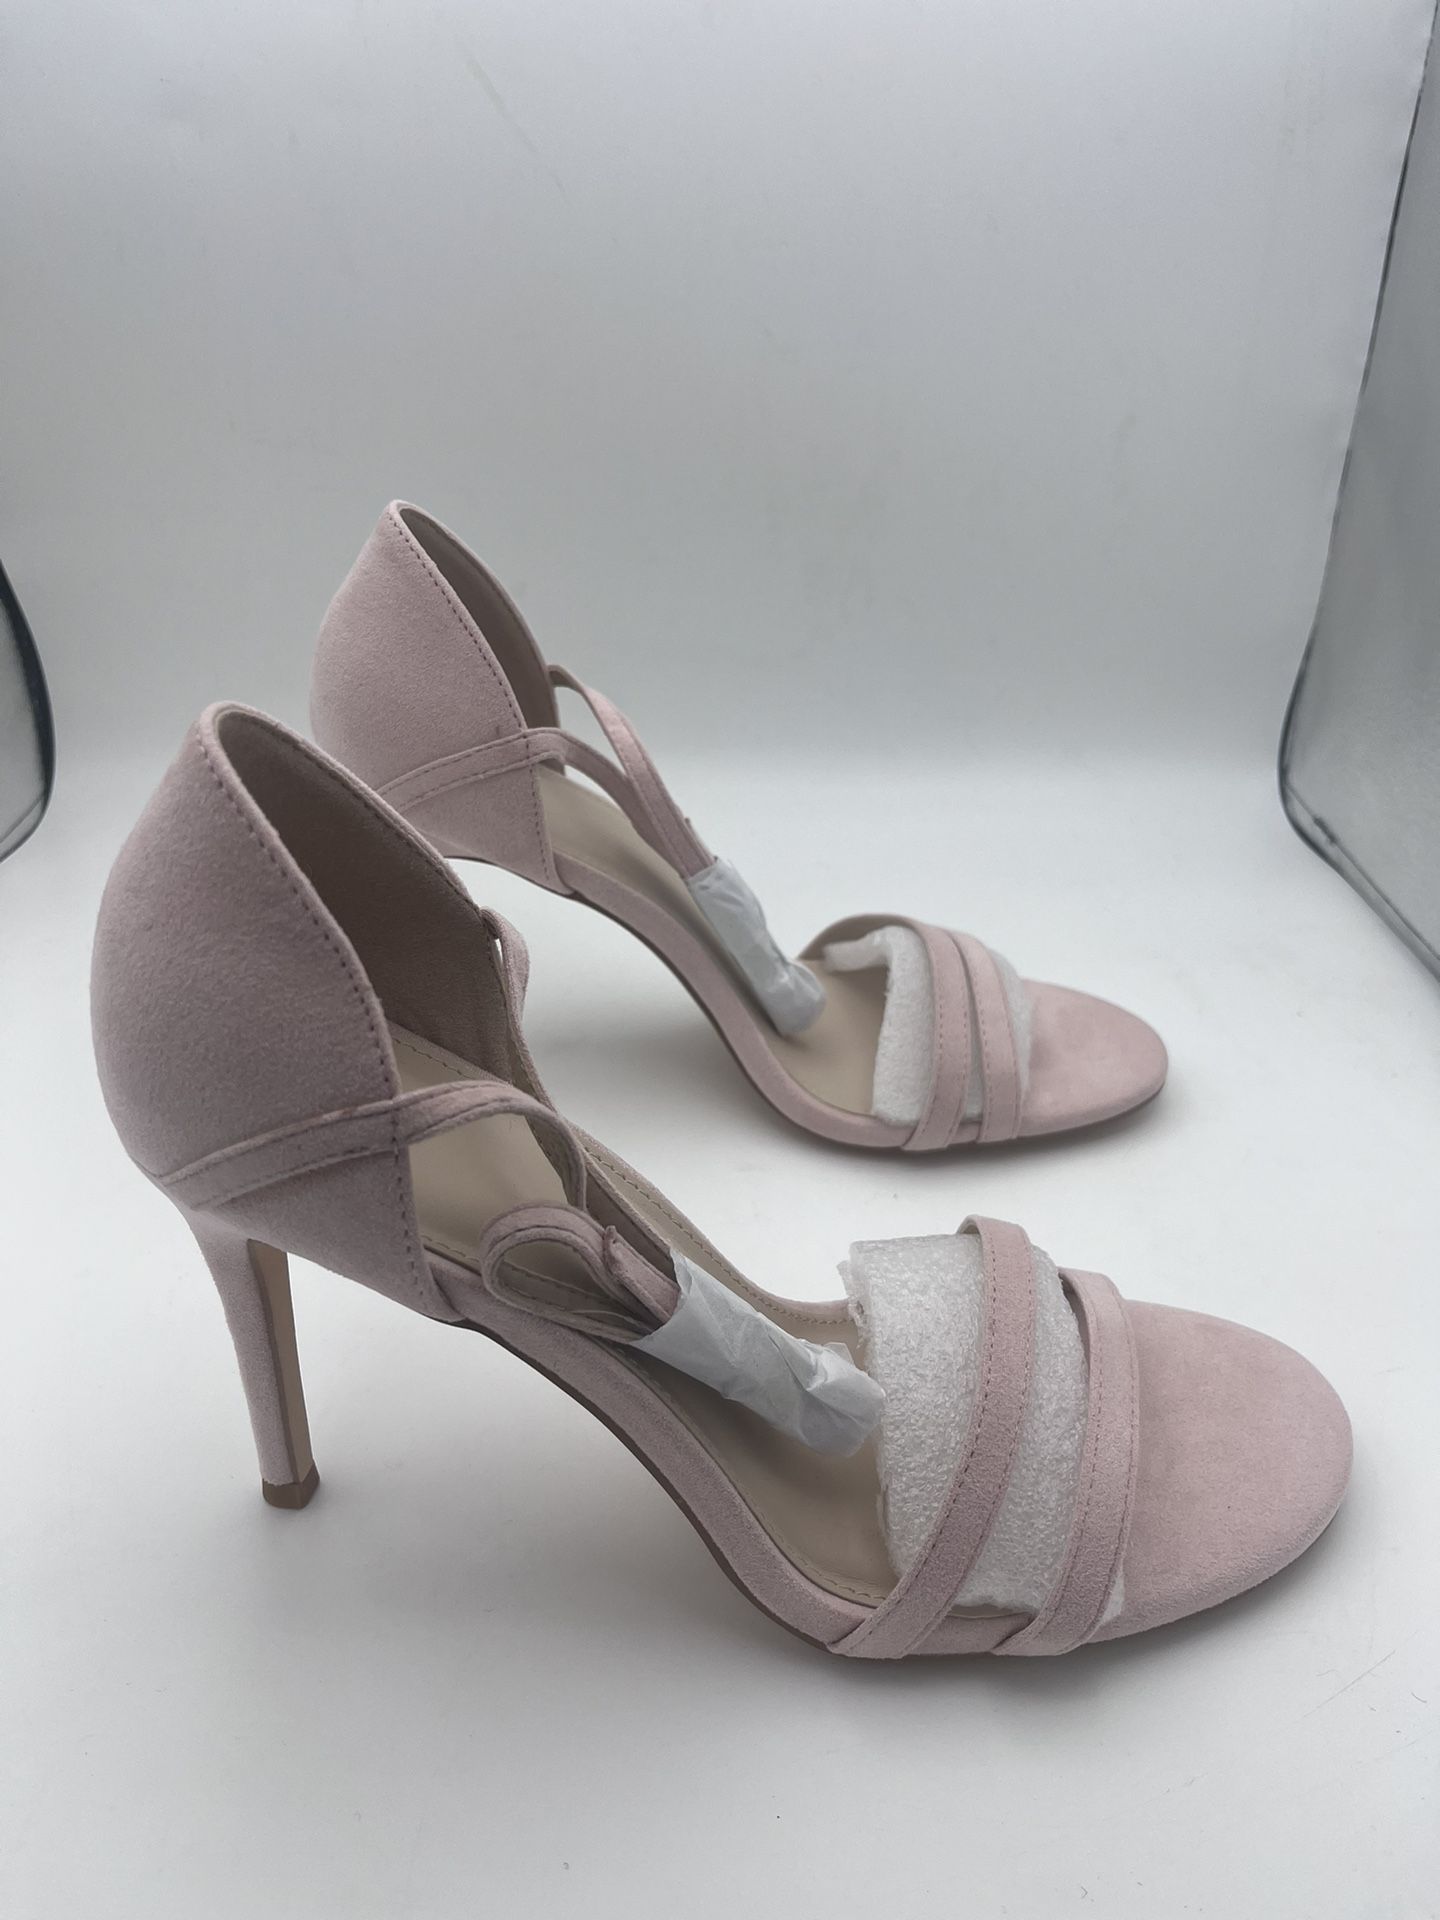 Coutgo Womens High Stiletto Heeled Pumps Wedding Party Dress Shoes Pink Size 9